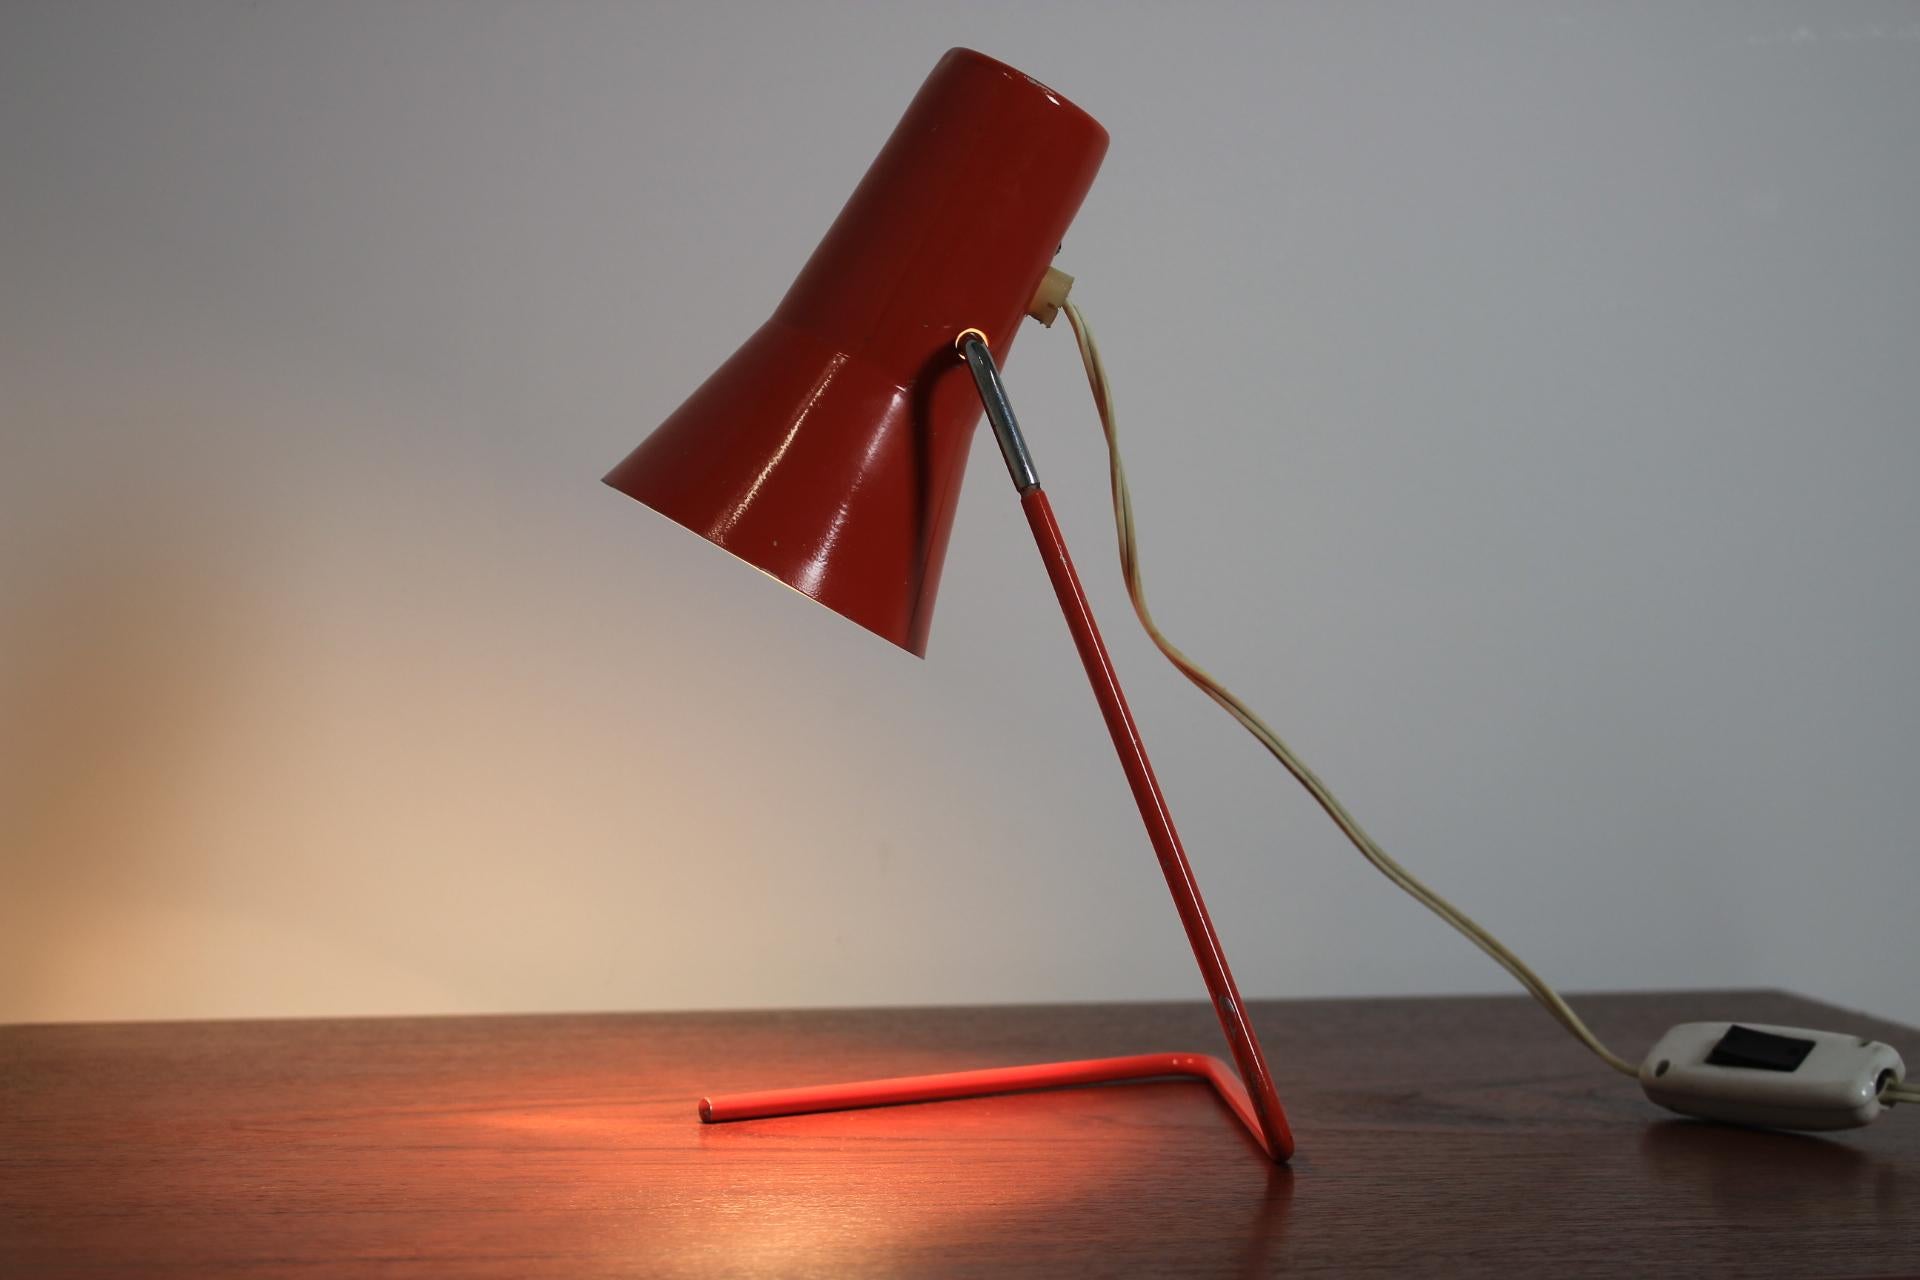 - Iconic table lamp from Czech Republic
- Nice style of lighting
- Very practical 
- Name of model is Talampa.